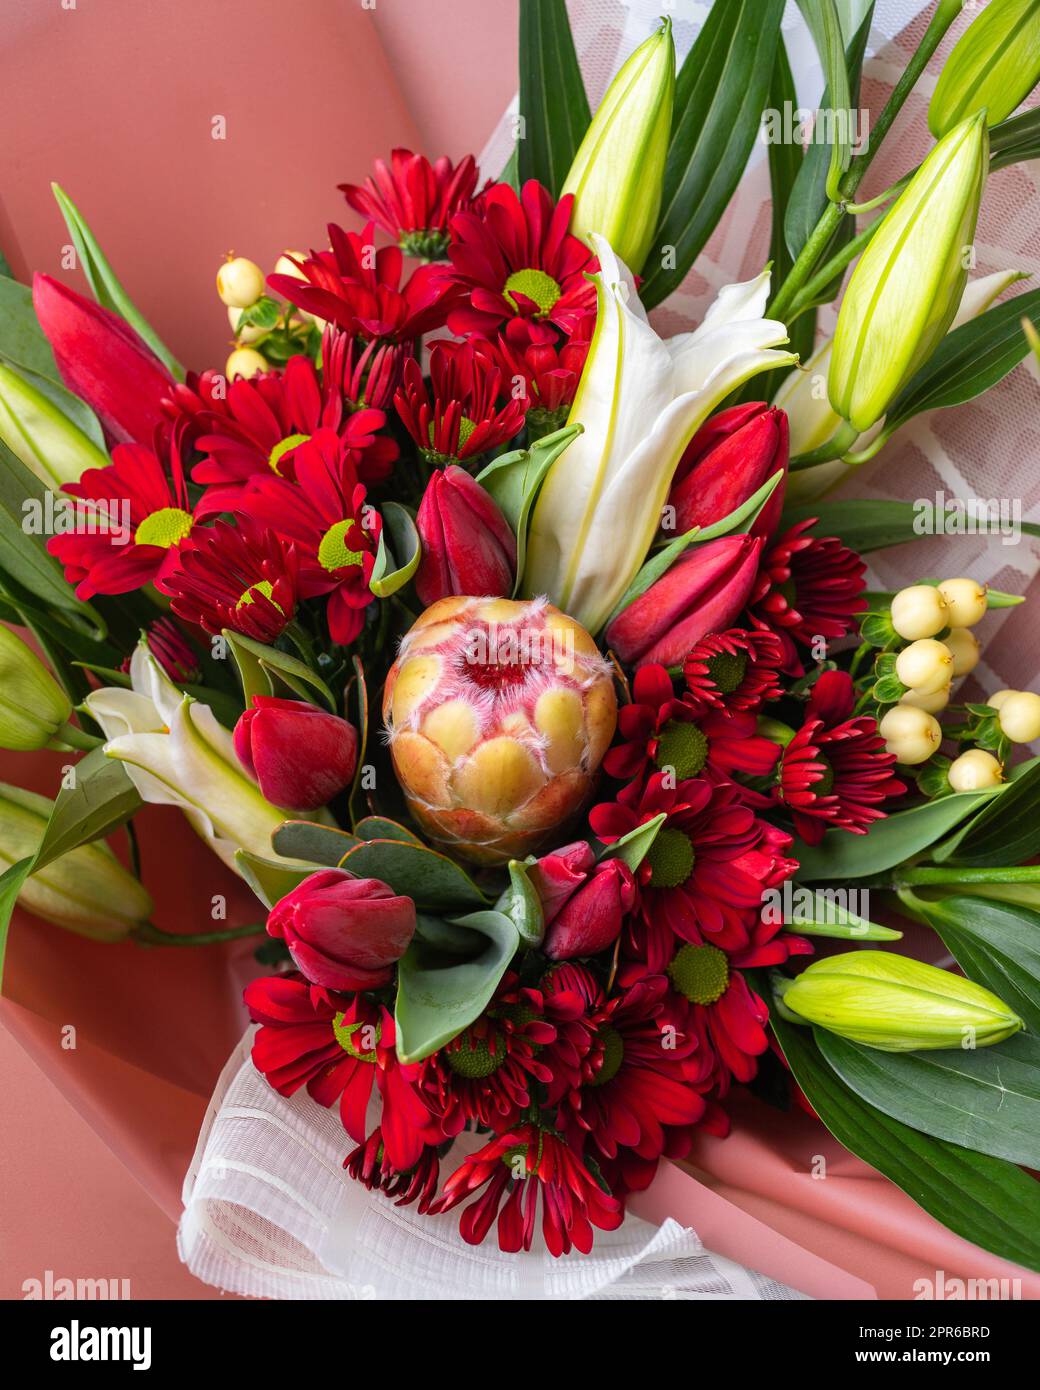 Close up top view of bouquet of bright flowers in red and green colors wrapped in paper. Stock Photo